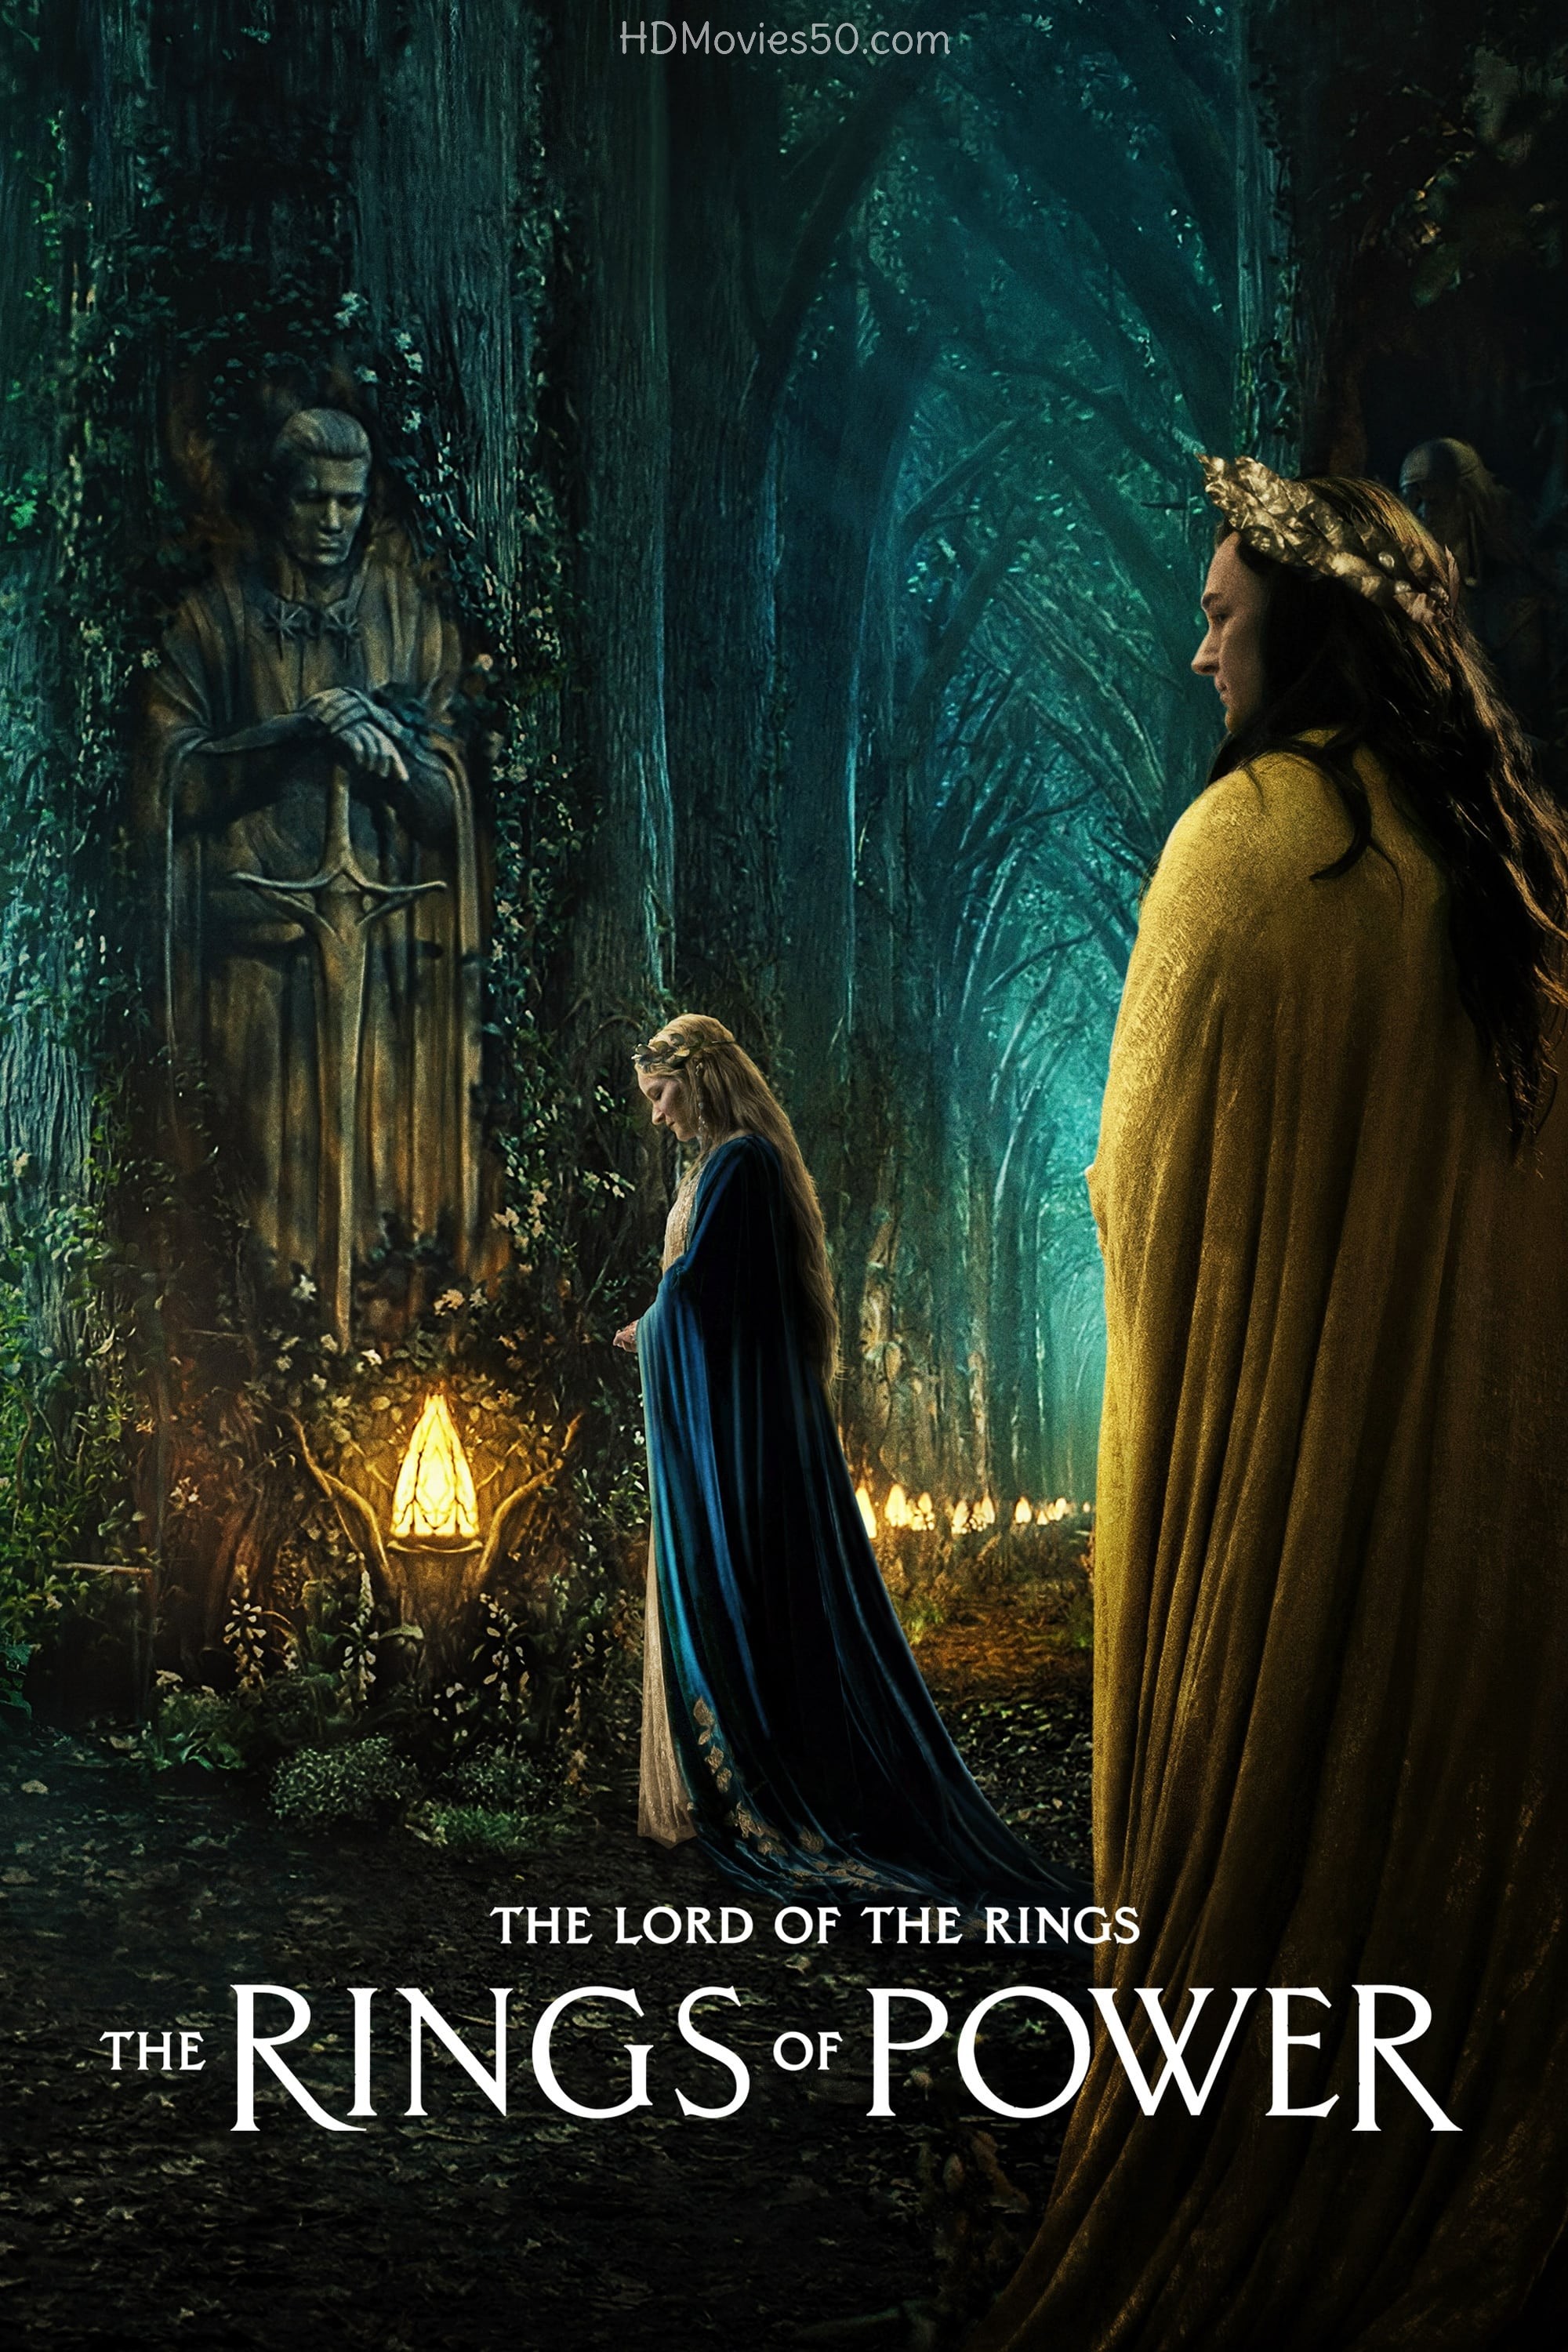 The Lord of The Rings The Rings Of Power 2022 S01E05 Hindi ORG Dual Audio 1080p AMZN HDRip MSub 1.35GB Download